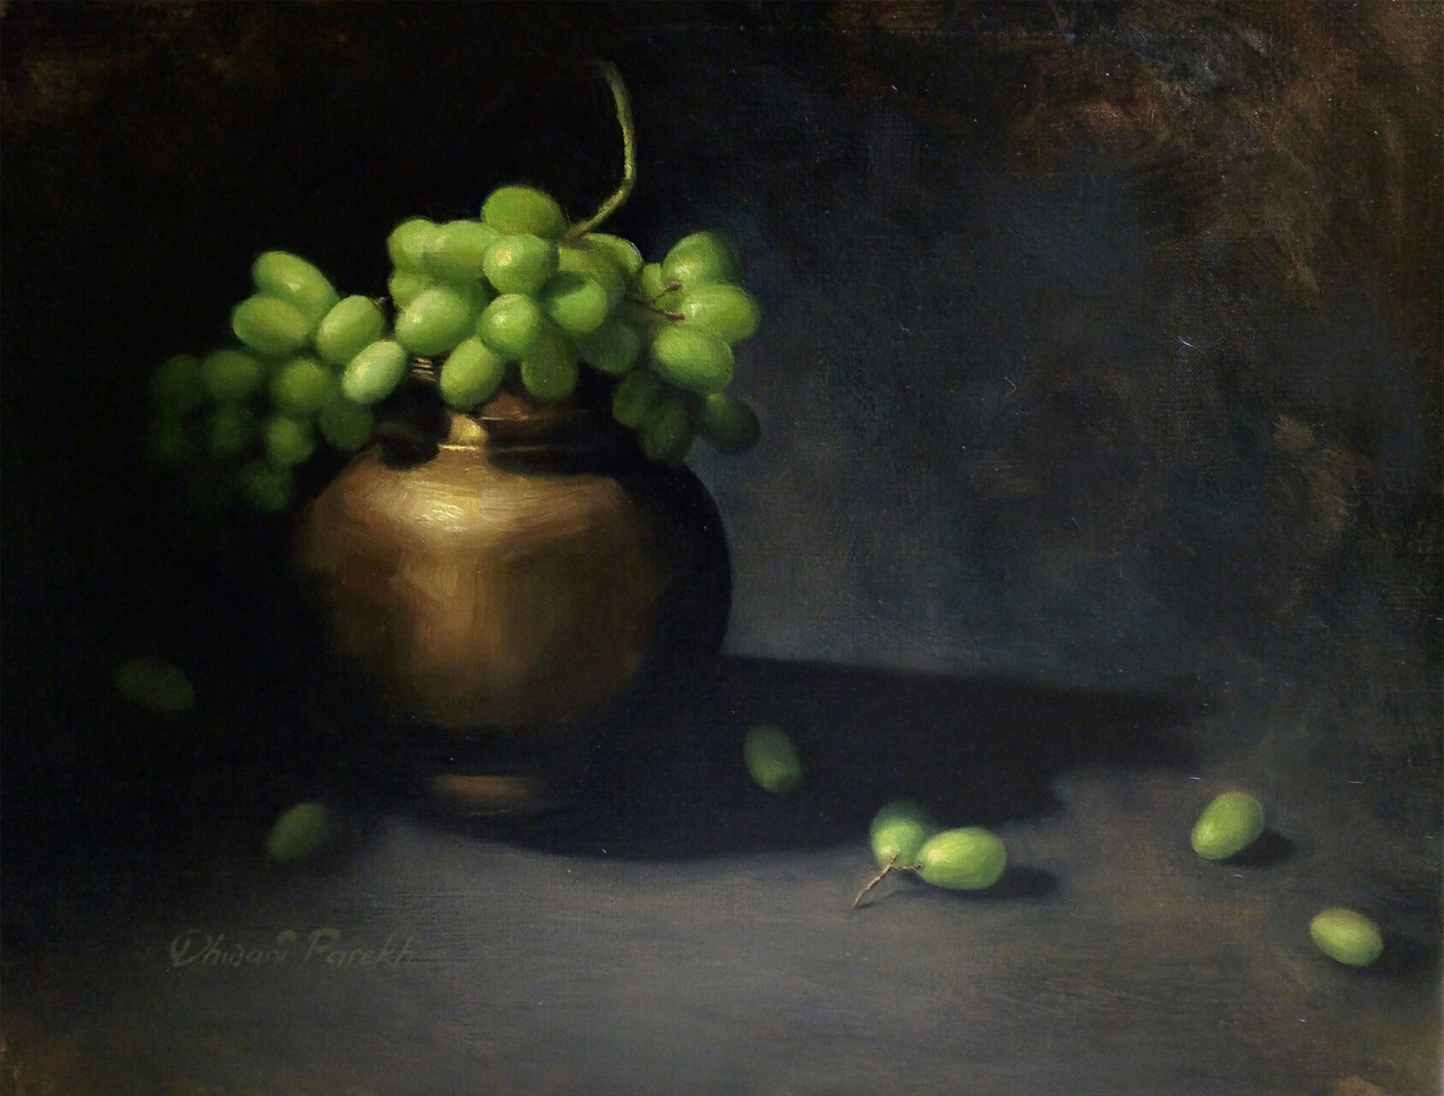  Brass and Grapes  20 x 16  Oil on Canvas 